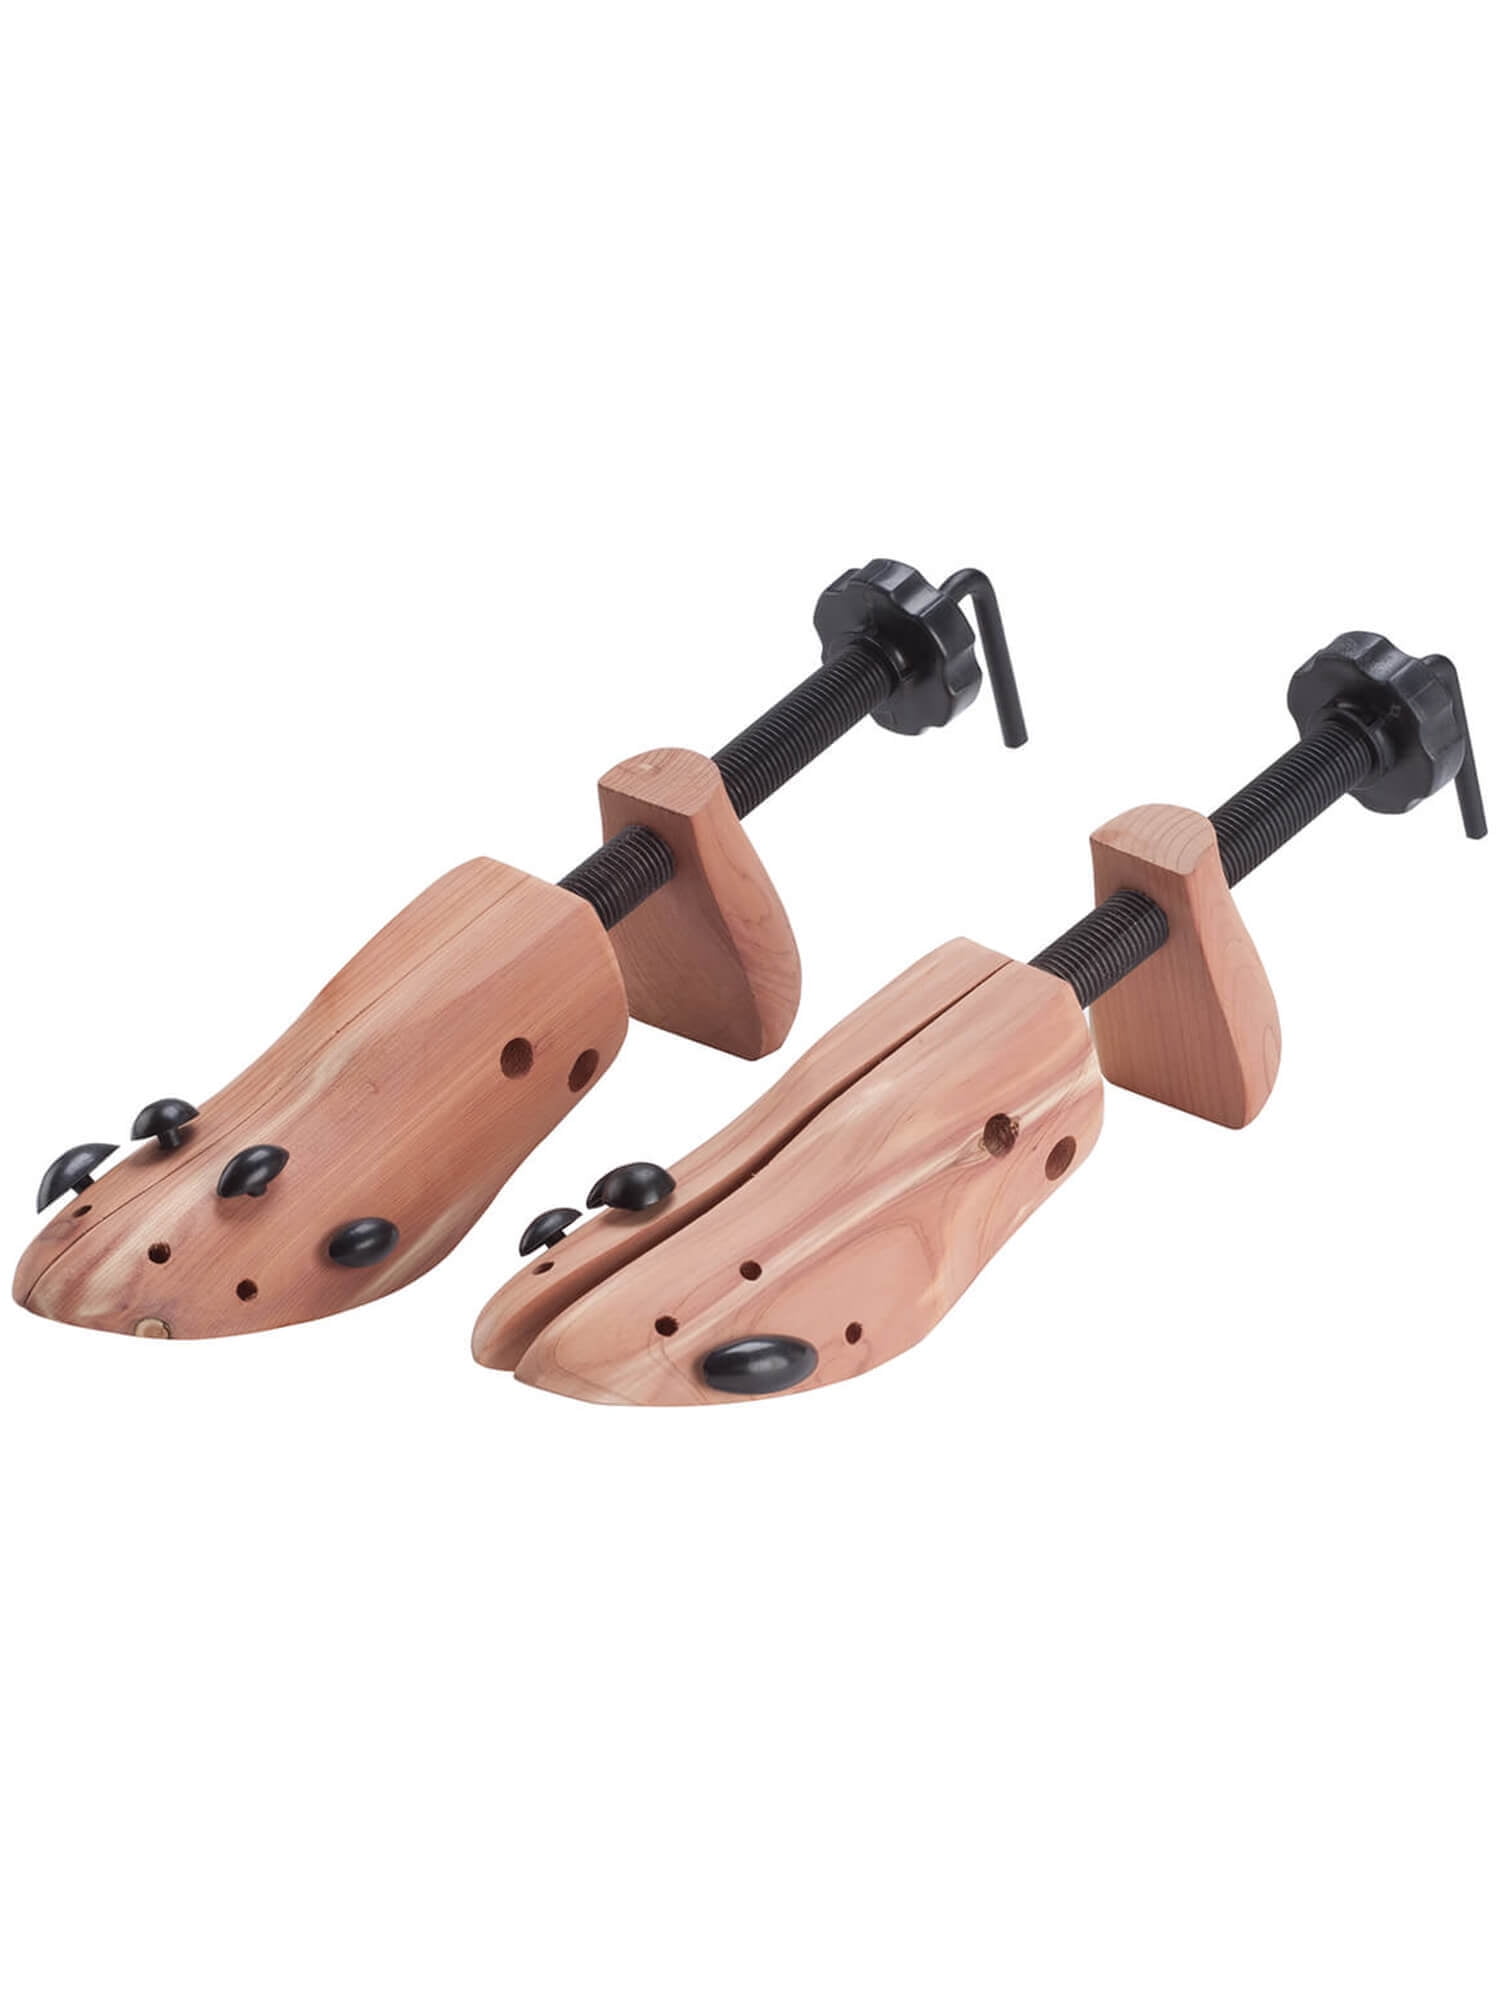 ICYANG 2Pair Portable Mini Shoes Stretchers Keeper Width Extender Adjustable Aid Shoe Trees For Men Women